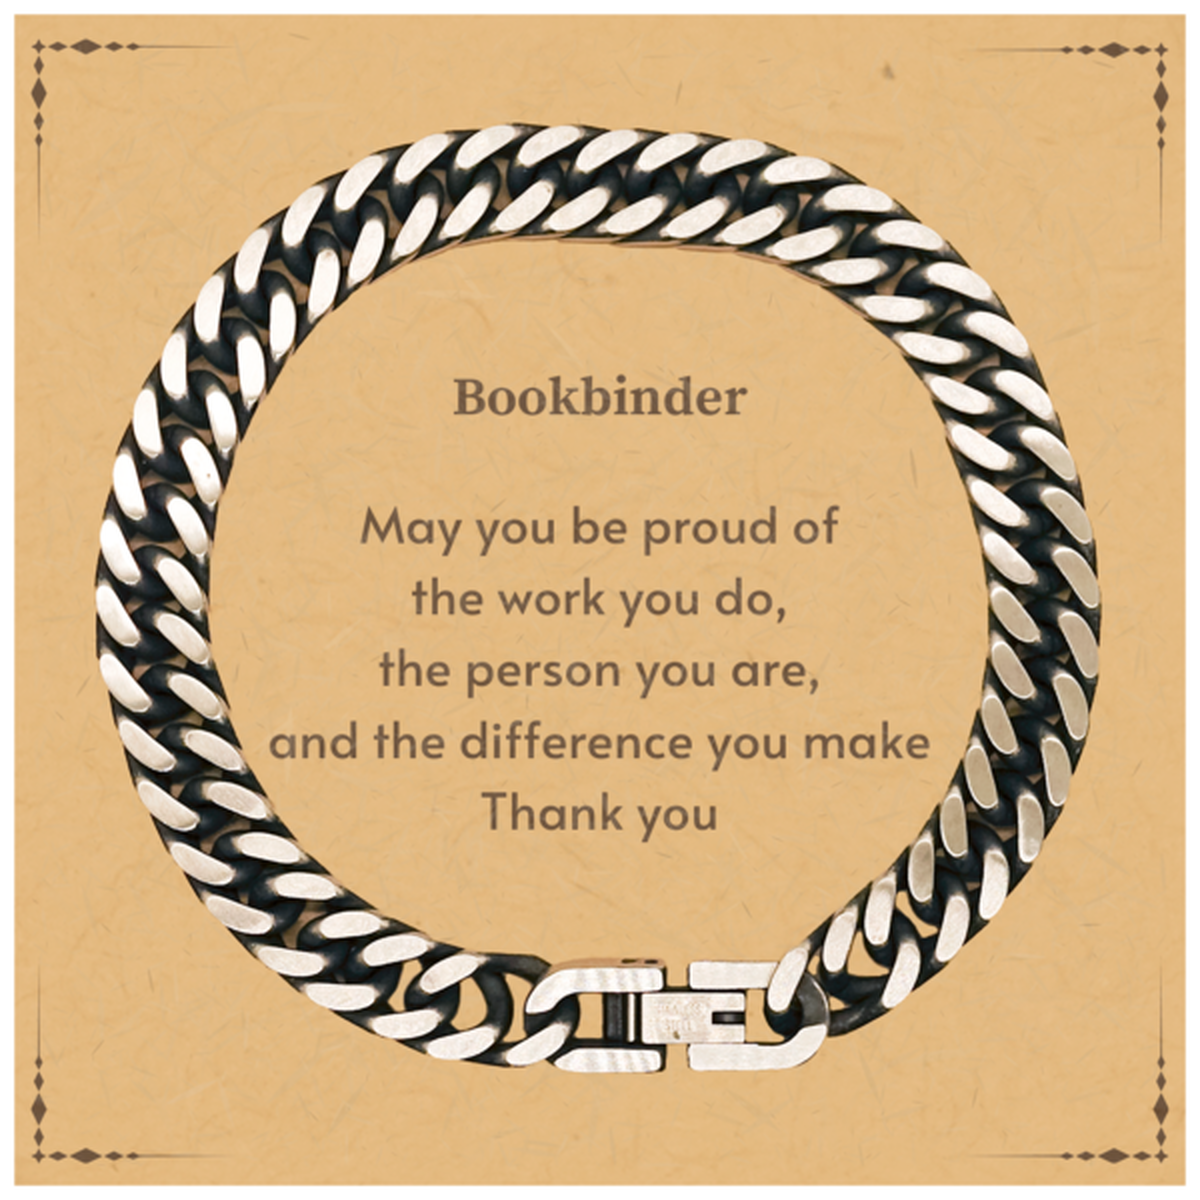 Heartwarming Cuban Link Chain Bracelet Retirement Coworkers Gifts for Bookbinder, Bookbinder May You be proud of the work you do, the person you are Gifts for Boss Men Women Friends